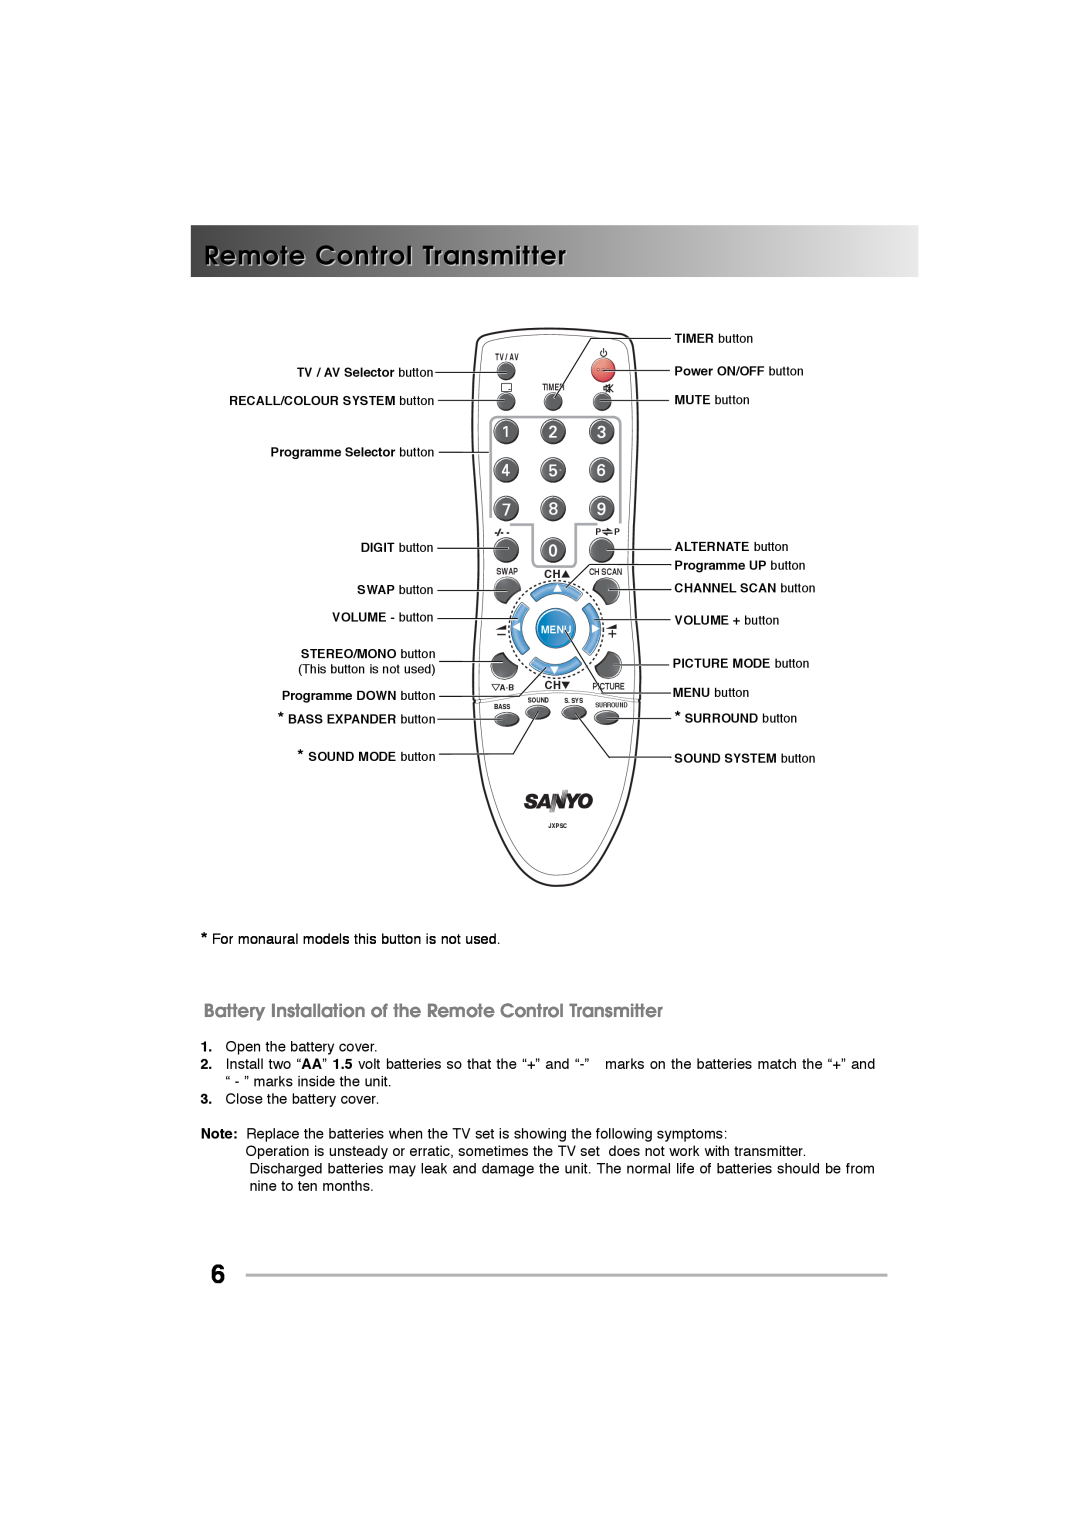 Sanyo P21CF1M, 21VF1K, A21CF1M instruction manual Battery Installation of the Remote Control Transmitter 